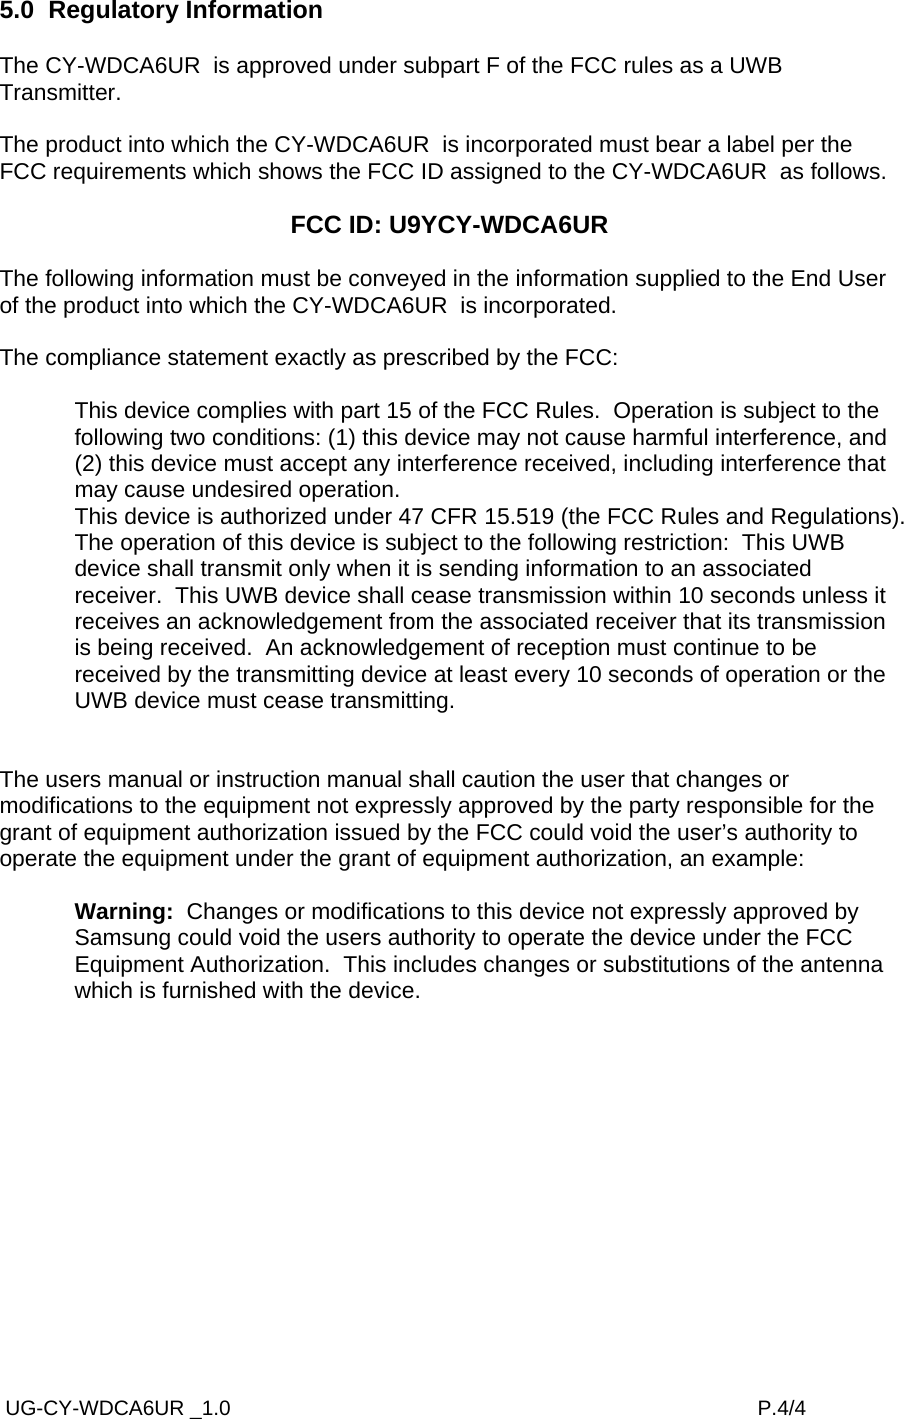  UG-CY-WDCA6UR _1.0                                                                                           P.4/4 5.0  Regulatory Information  The CY-WDCA6UR  is approved under subpart F of the FCC rules as a UWB Transmitter.  The product into which the CY-WDCA6UR  is incorporated must bear a label per the FCC requirements which shows the FCC ID assigned to the CY-WDCA6UR  as follows.  FCC ID: U9YCY-WDCA6UR   The following information must be conveyed in the information supplied to the End User of the product into which the CY-WDCA6UR  is incorporated.  The compliance statement exactly as prescribed by the FCC:  This device complies with part 15 of the FCC Rules.  Operation is subject to the following two conditions: (1) this device may not cause harmful interference, and (2) this device must accept any interference received, including interference that may cause undesired operation. This device is authorized under 47 CFR 15.519 (the FCC Rules and Regulations).  The operation of this device is subject to the following restriction:  This UWB device shall transmit only when it is sending information to an associated receiver.  This UWB device shall cease transmission within 10 seconds unless it receives an acknowledgement from the associated receiver that its transmission is being received.  An acknowledgement of reception must continue to be received by the transmitting device at least every 10 seconds of operation or the UWB device must cease transmitting.   The users manual or instruction manual shall caution the user that changes or modifications to the equipment not expressly approved by the party responsible for the grant of equipment authorization issued by the FCC could void the user’s authority to operate the equipment under the grant of equipment authorization, an example:  Warning:  Changes or modifications to this device not expressly approved by Samsung could void the users authority to operate the device under the FCC Equipment Authorization.  This includes changes or substitutions of the antenna which is furnished with the device.  